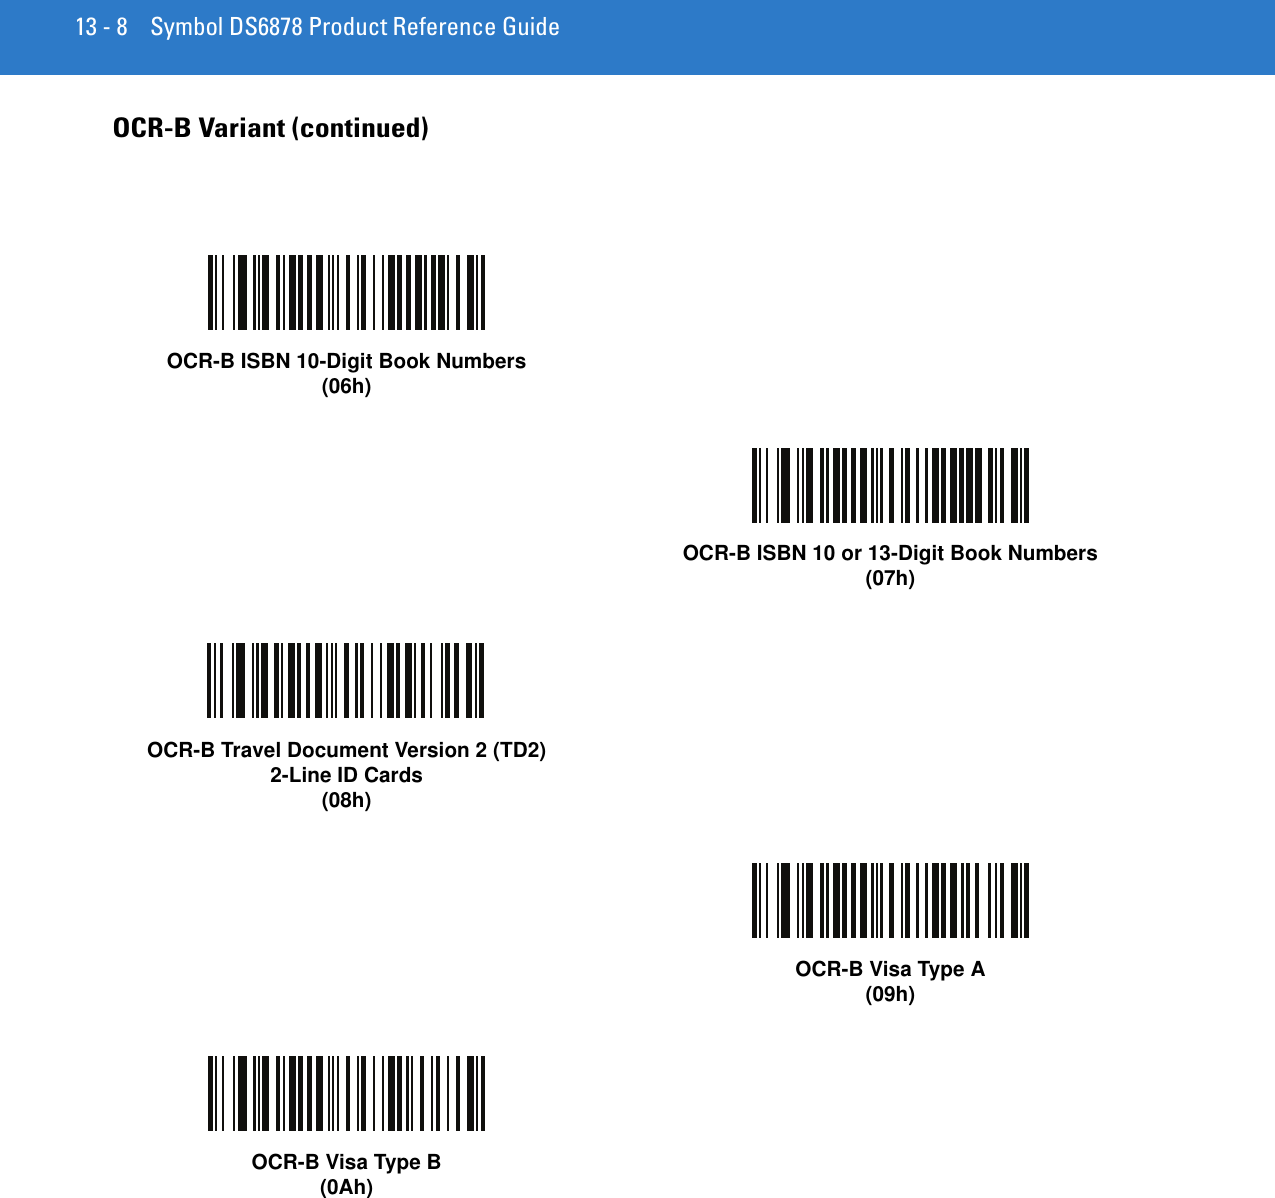 13 - 8 Symbol DS6878 Product Reference GuideOCR-B Variant (continued)OCR-B ISBN 10-Digit Book Numbers(06h)OCR-B ISBN 10 or 13-Digit Book Numbers(07h)OCR-B Travel Document Version 2 (TD2)2-Line ID Cards(08h)OCR-B Visa Type A(09h)OCR-B Visa Type B(0Ah)